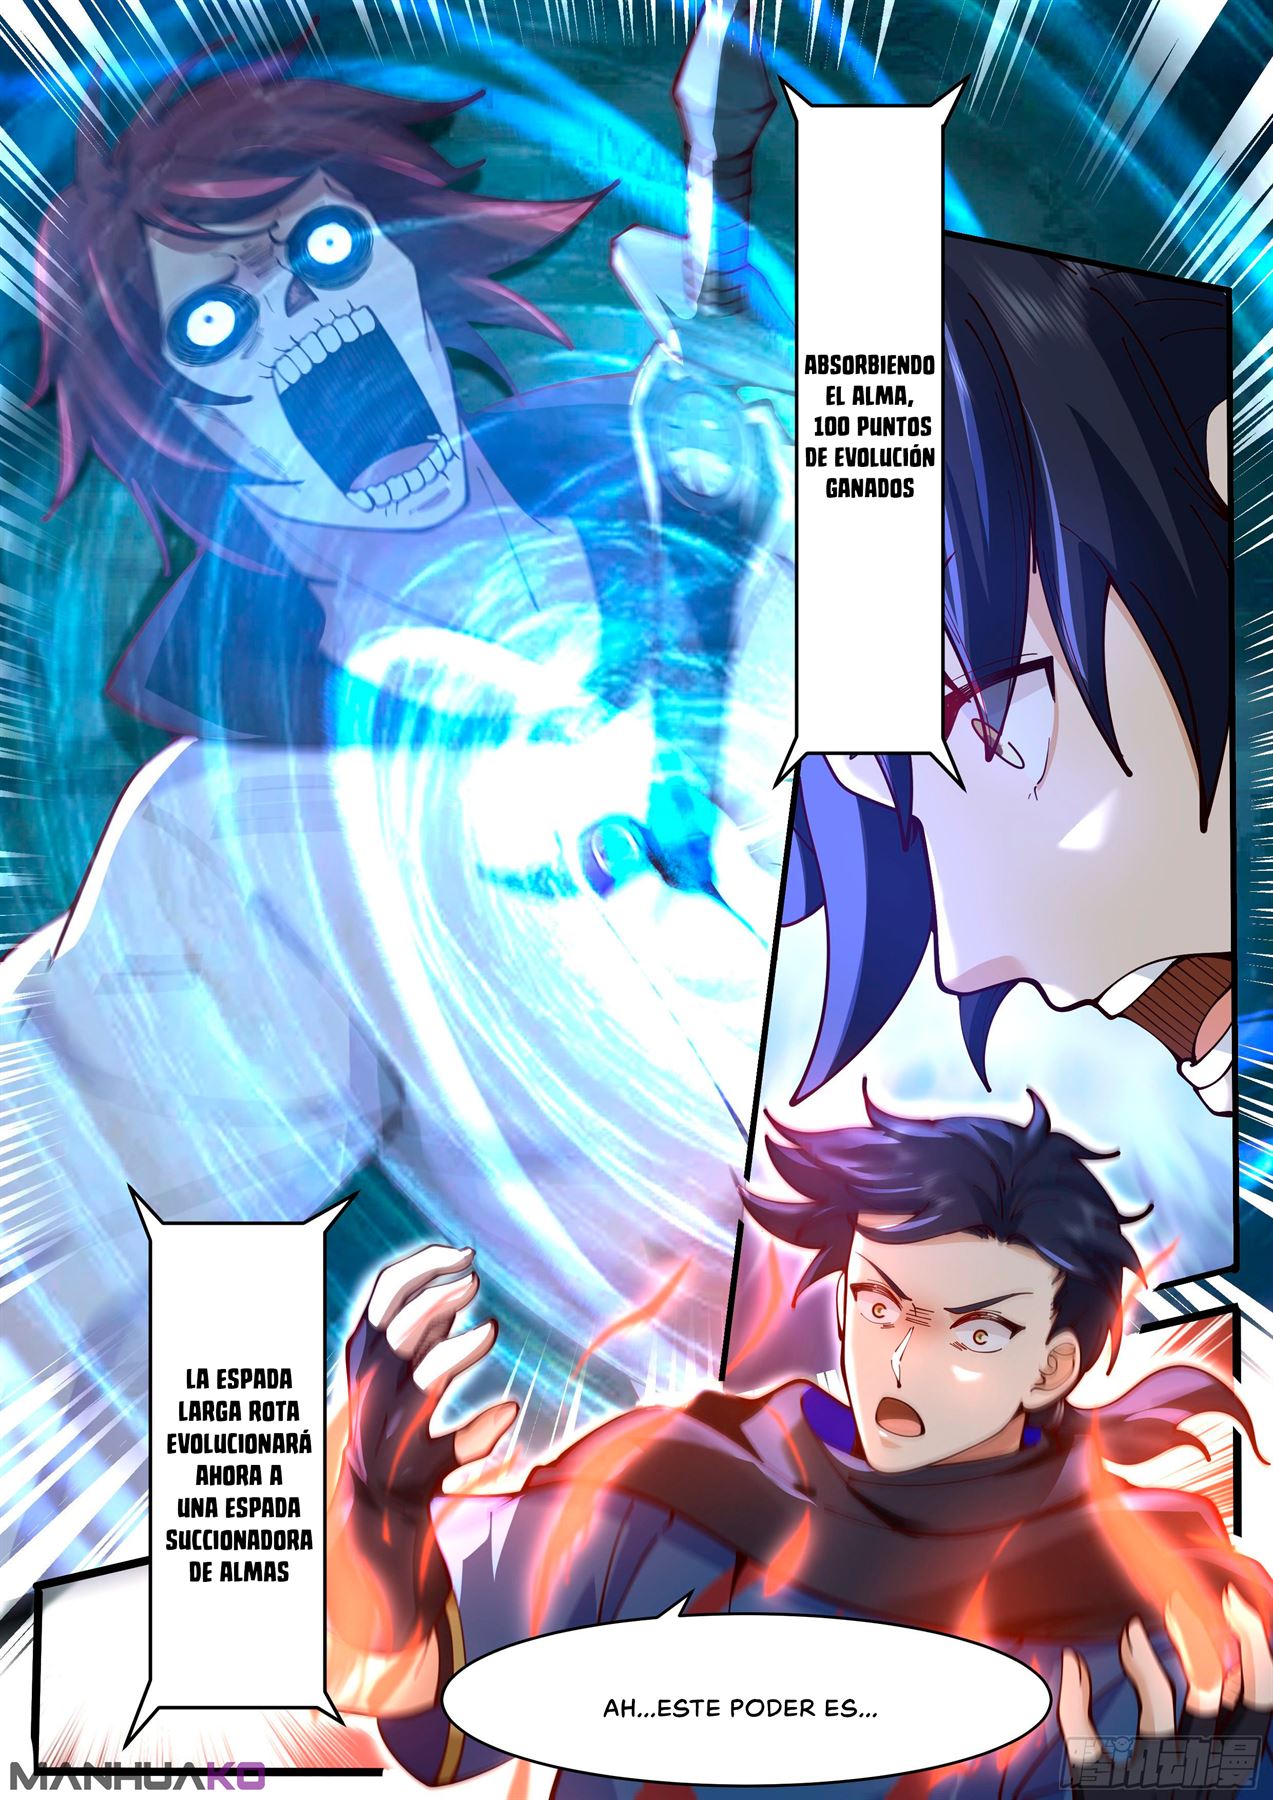 Manga Killing Evolution From a Sword Chapter 1.1 image number 13